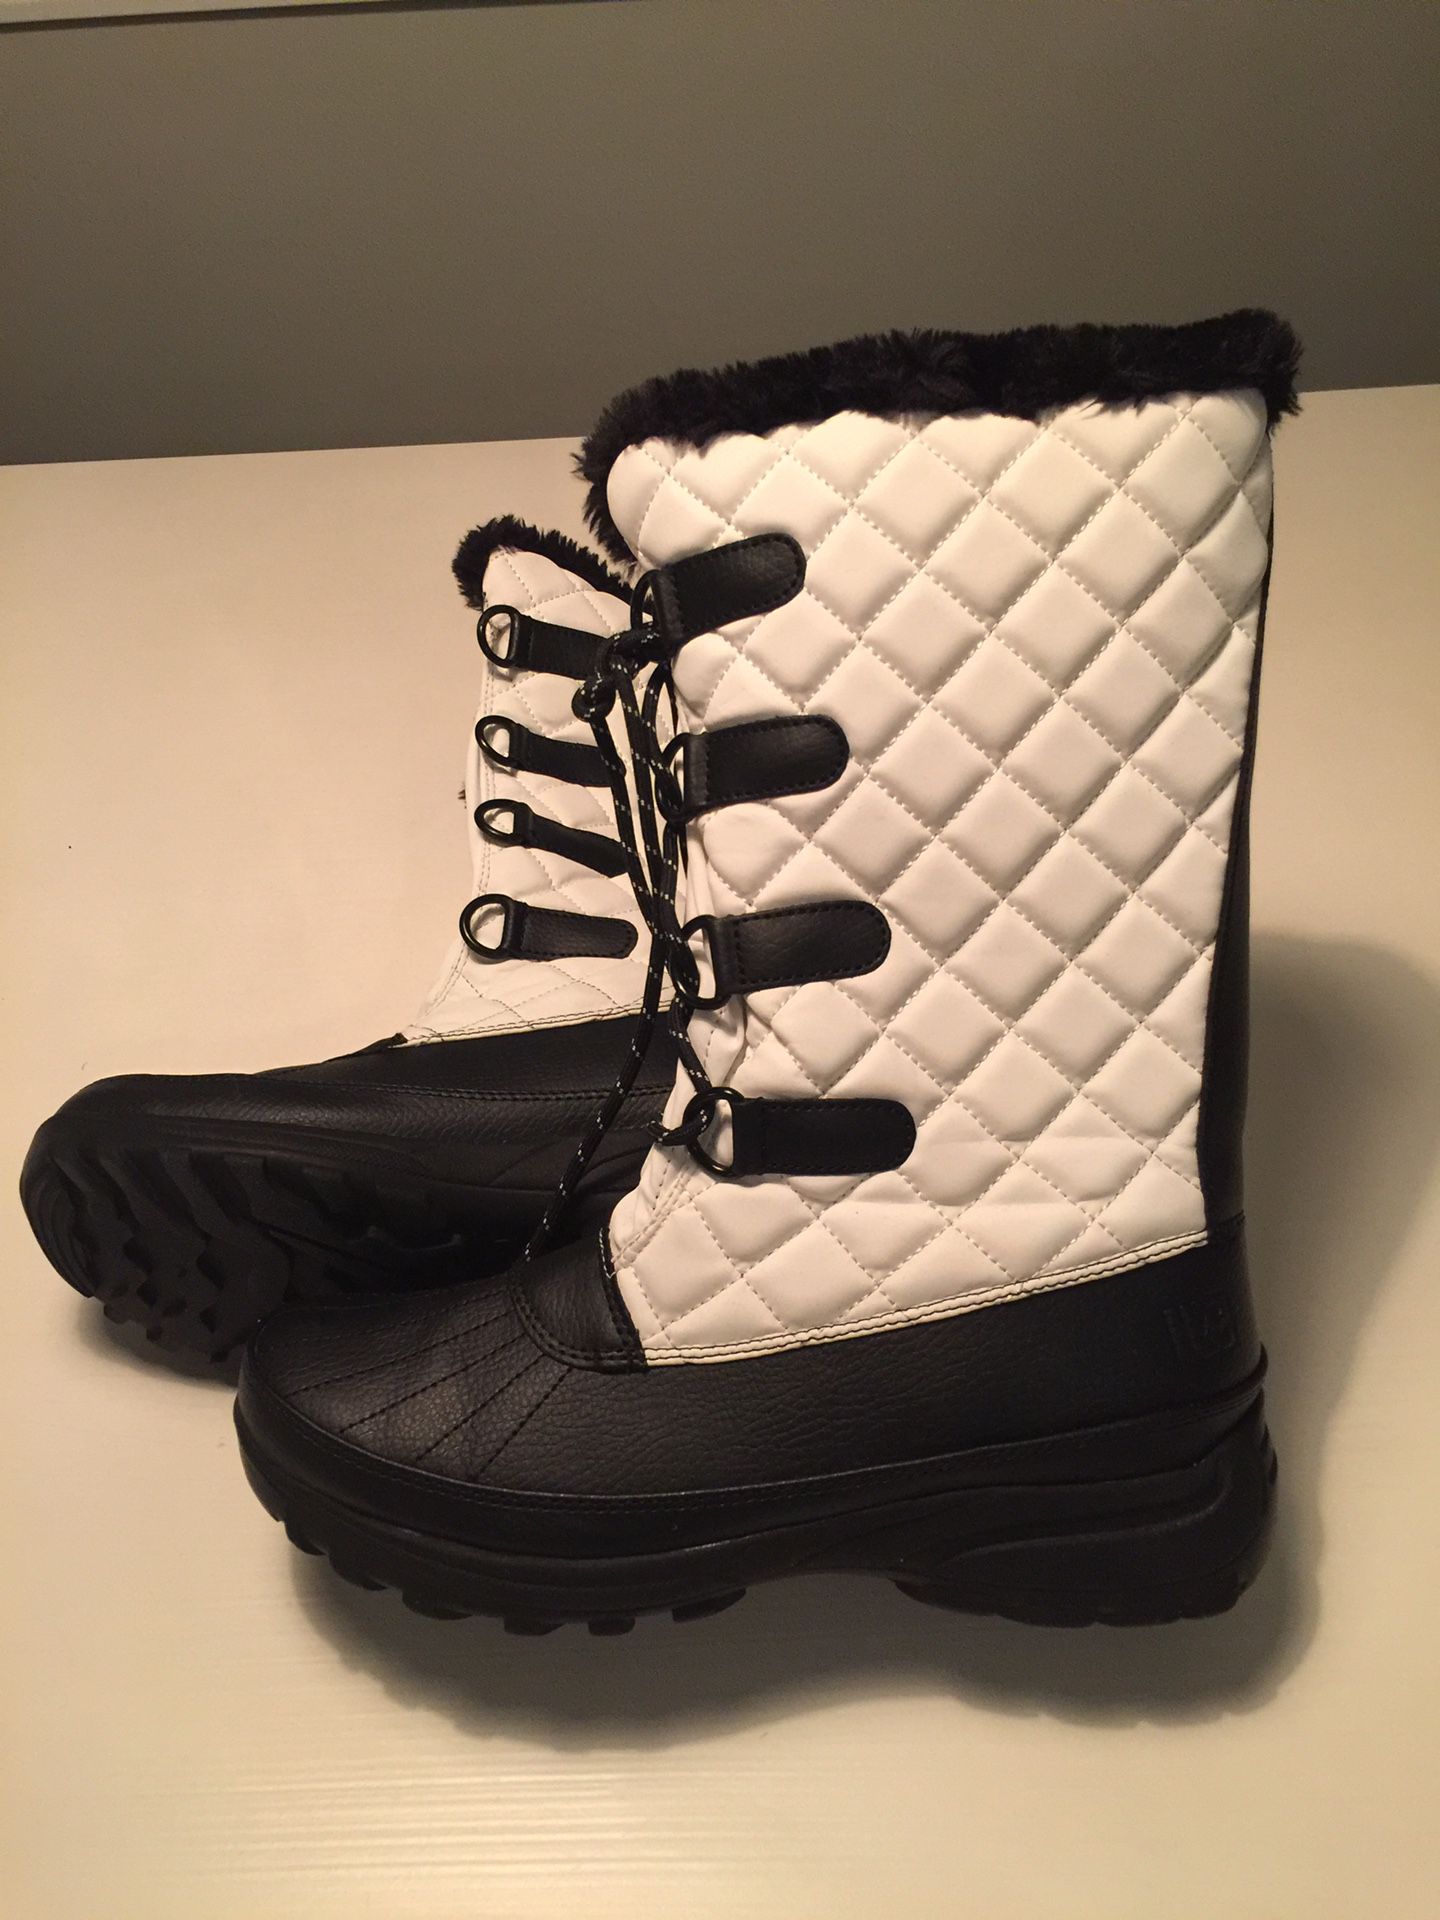 Rugged outback rain/snow boots